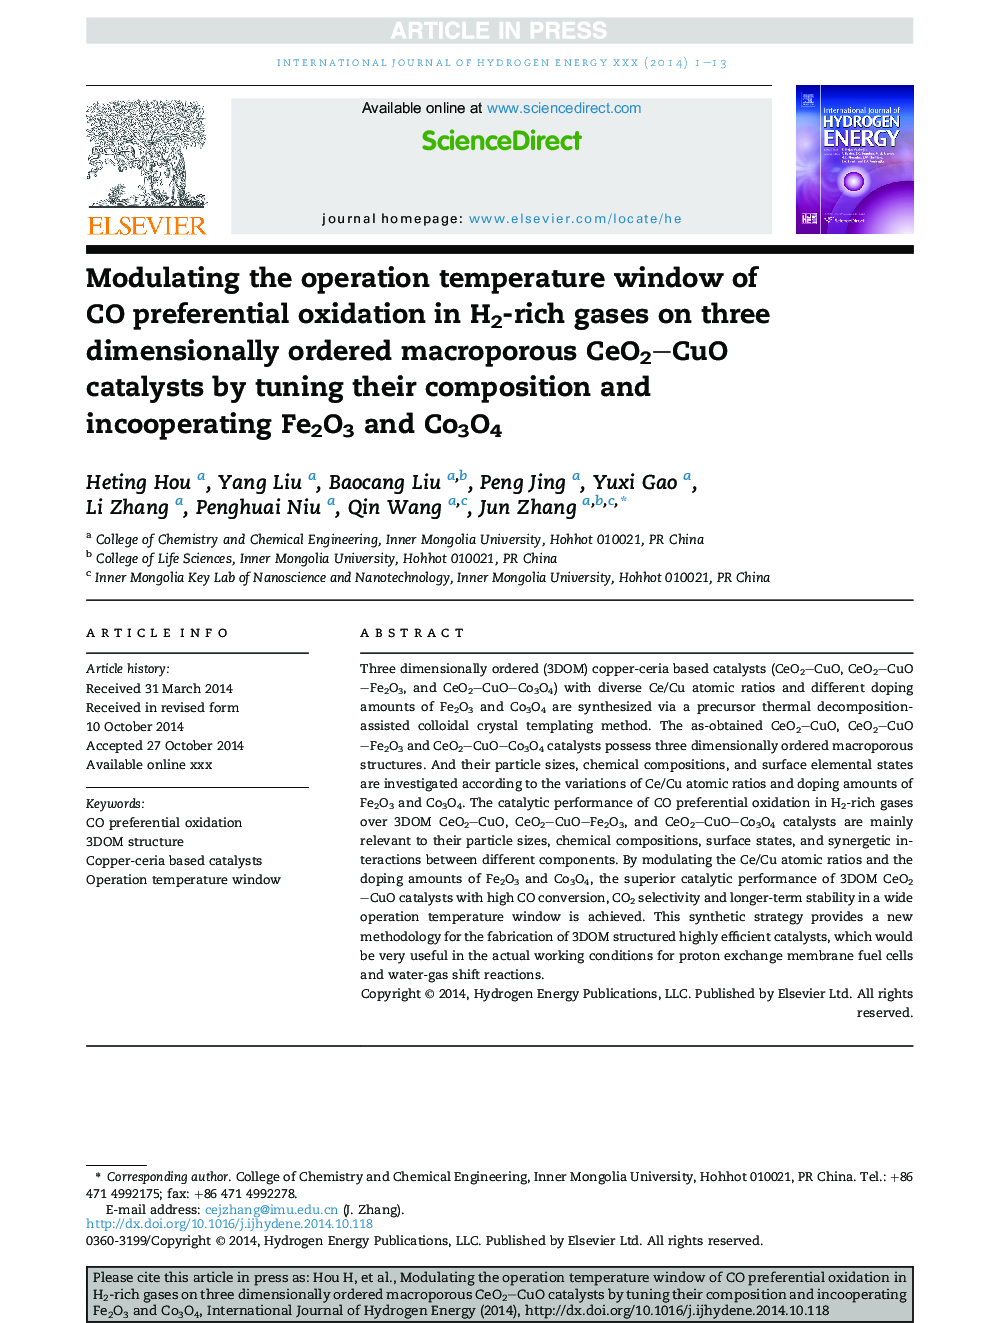 Modulating the operation temperature window of CO preferential oxidation in H2-rich gases on three dimensionally ordered macroporous CeO2-CuO catalysts by tuning their composition and incooperating Fe2O3 and Co3O4